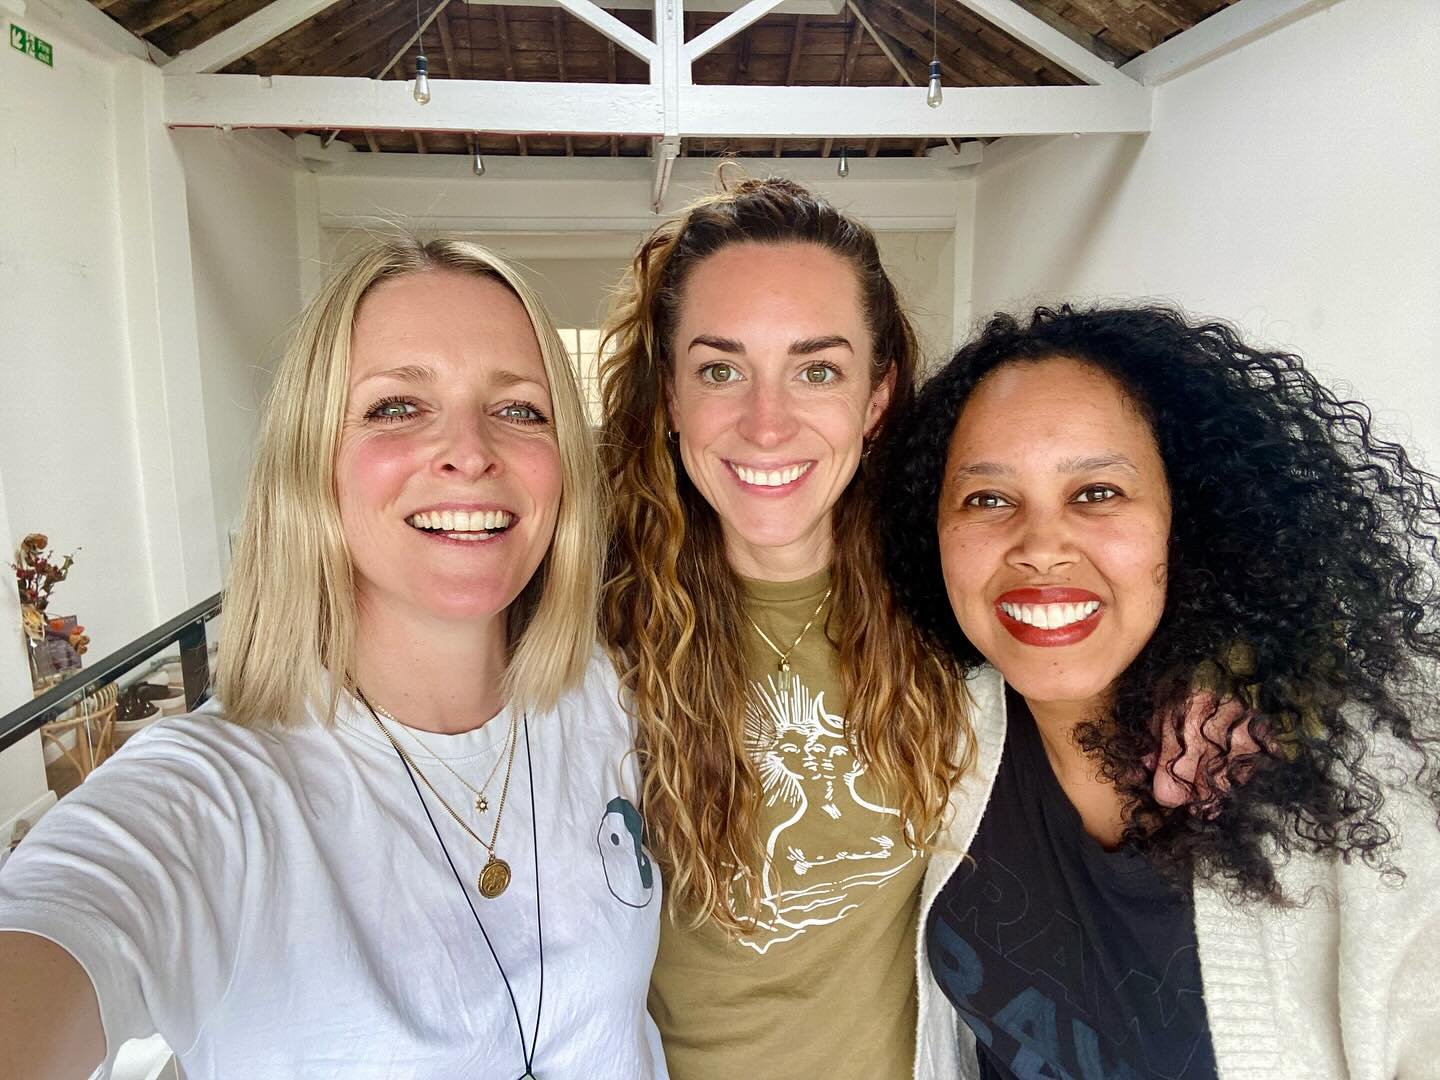 Dream team vibes on Sunday, hosting a breath workshop at beautiful @samyastudios_ in Highbury, complete with Haku the cutest studio dog 😍

Such a friendly bunch of participants came together, where we pulled Oracle cards, set intentions &amp; had a 